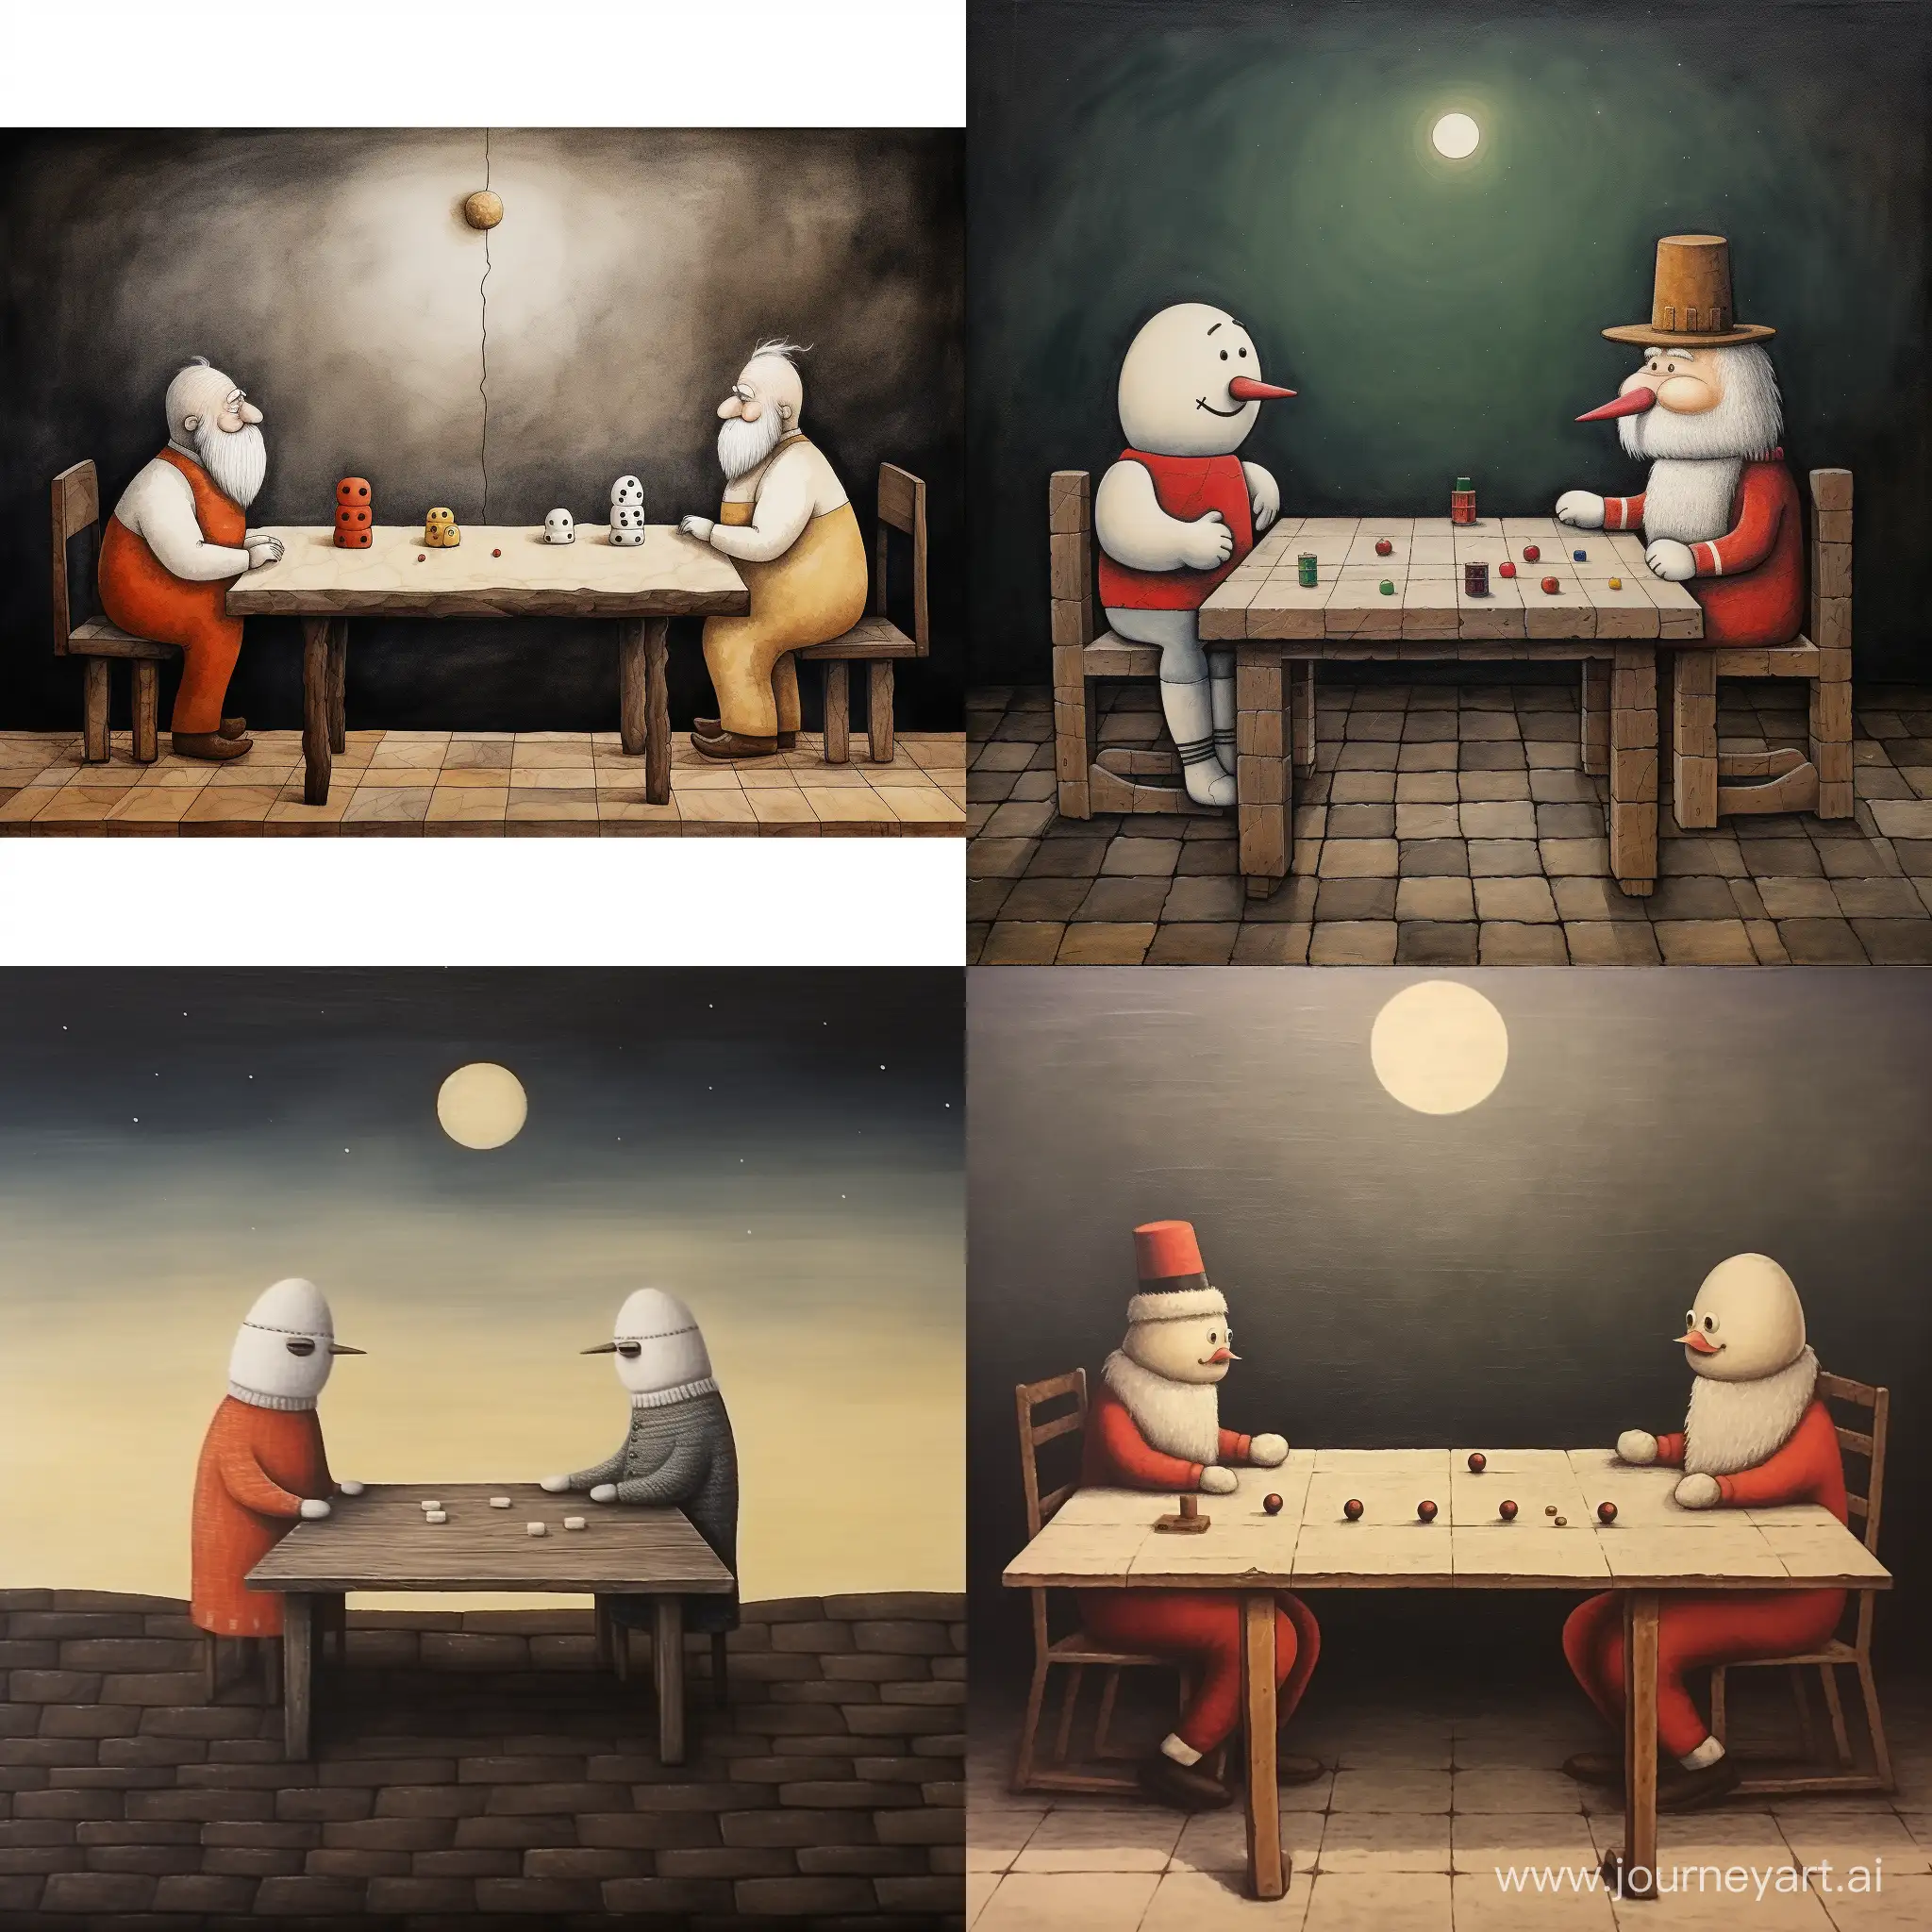 Santa Claus and the snowman are sitting opposite each other at the table. There is a flat square board on the table, 19 vertical and 19 horizontal lines are drawn on the board, round stones are located on the board